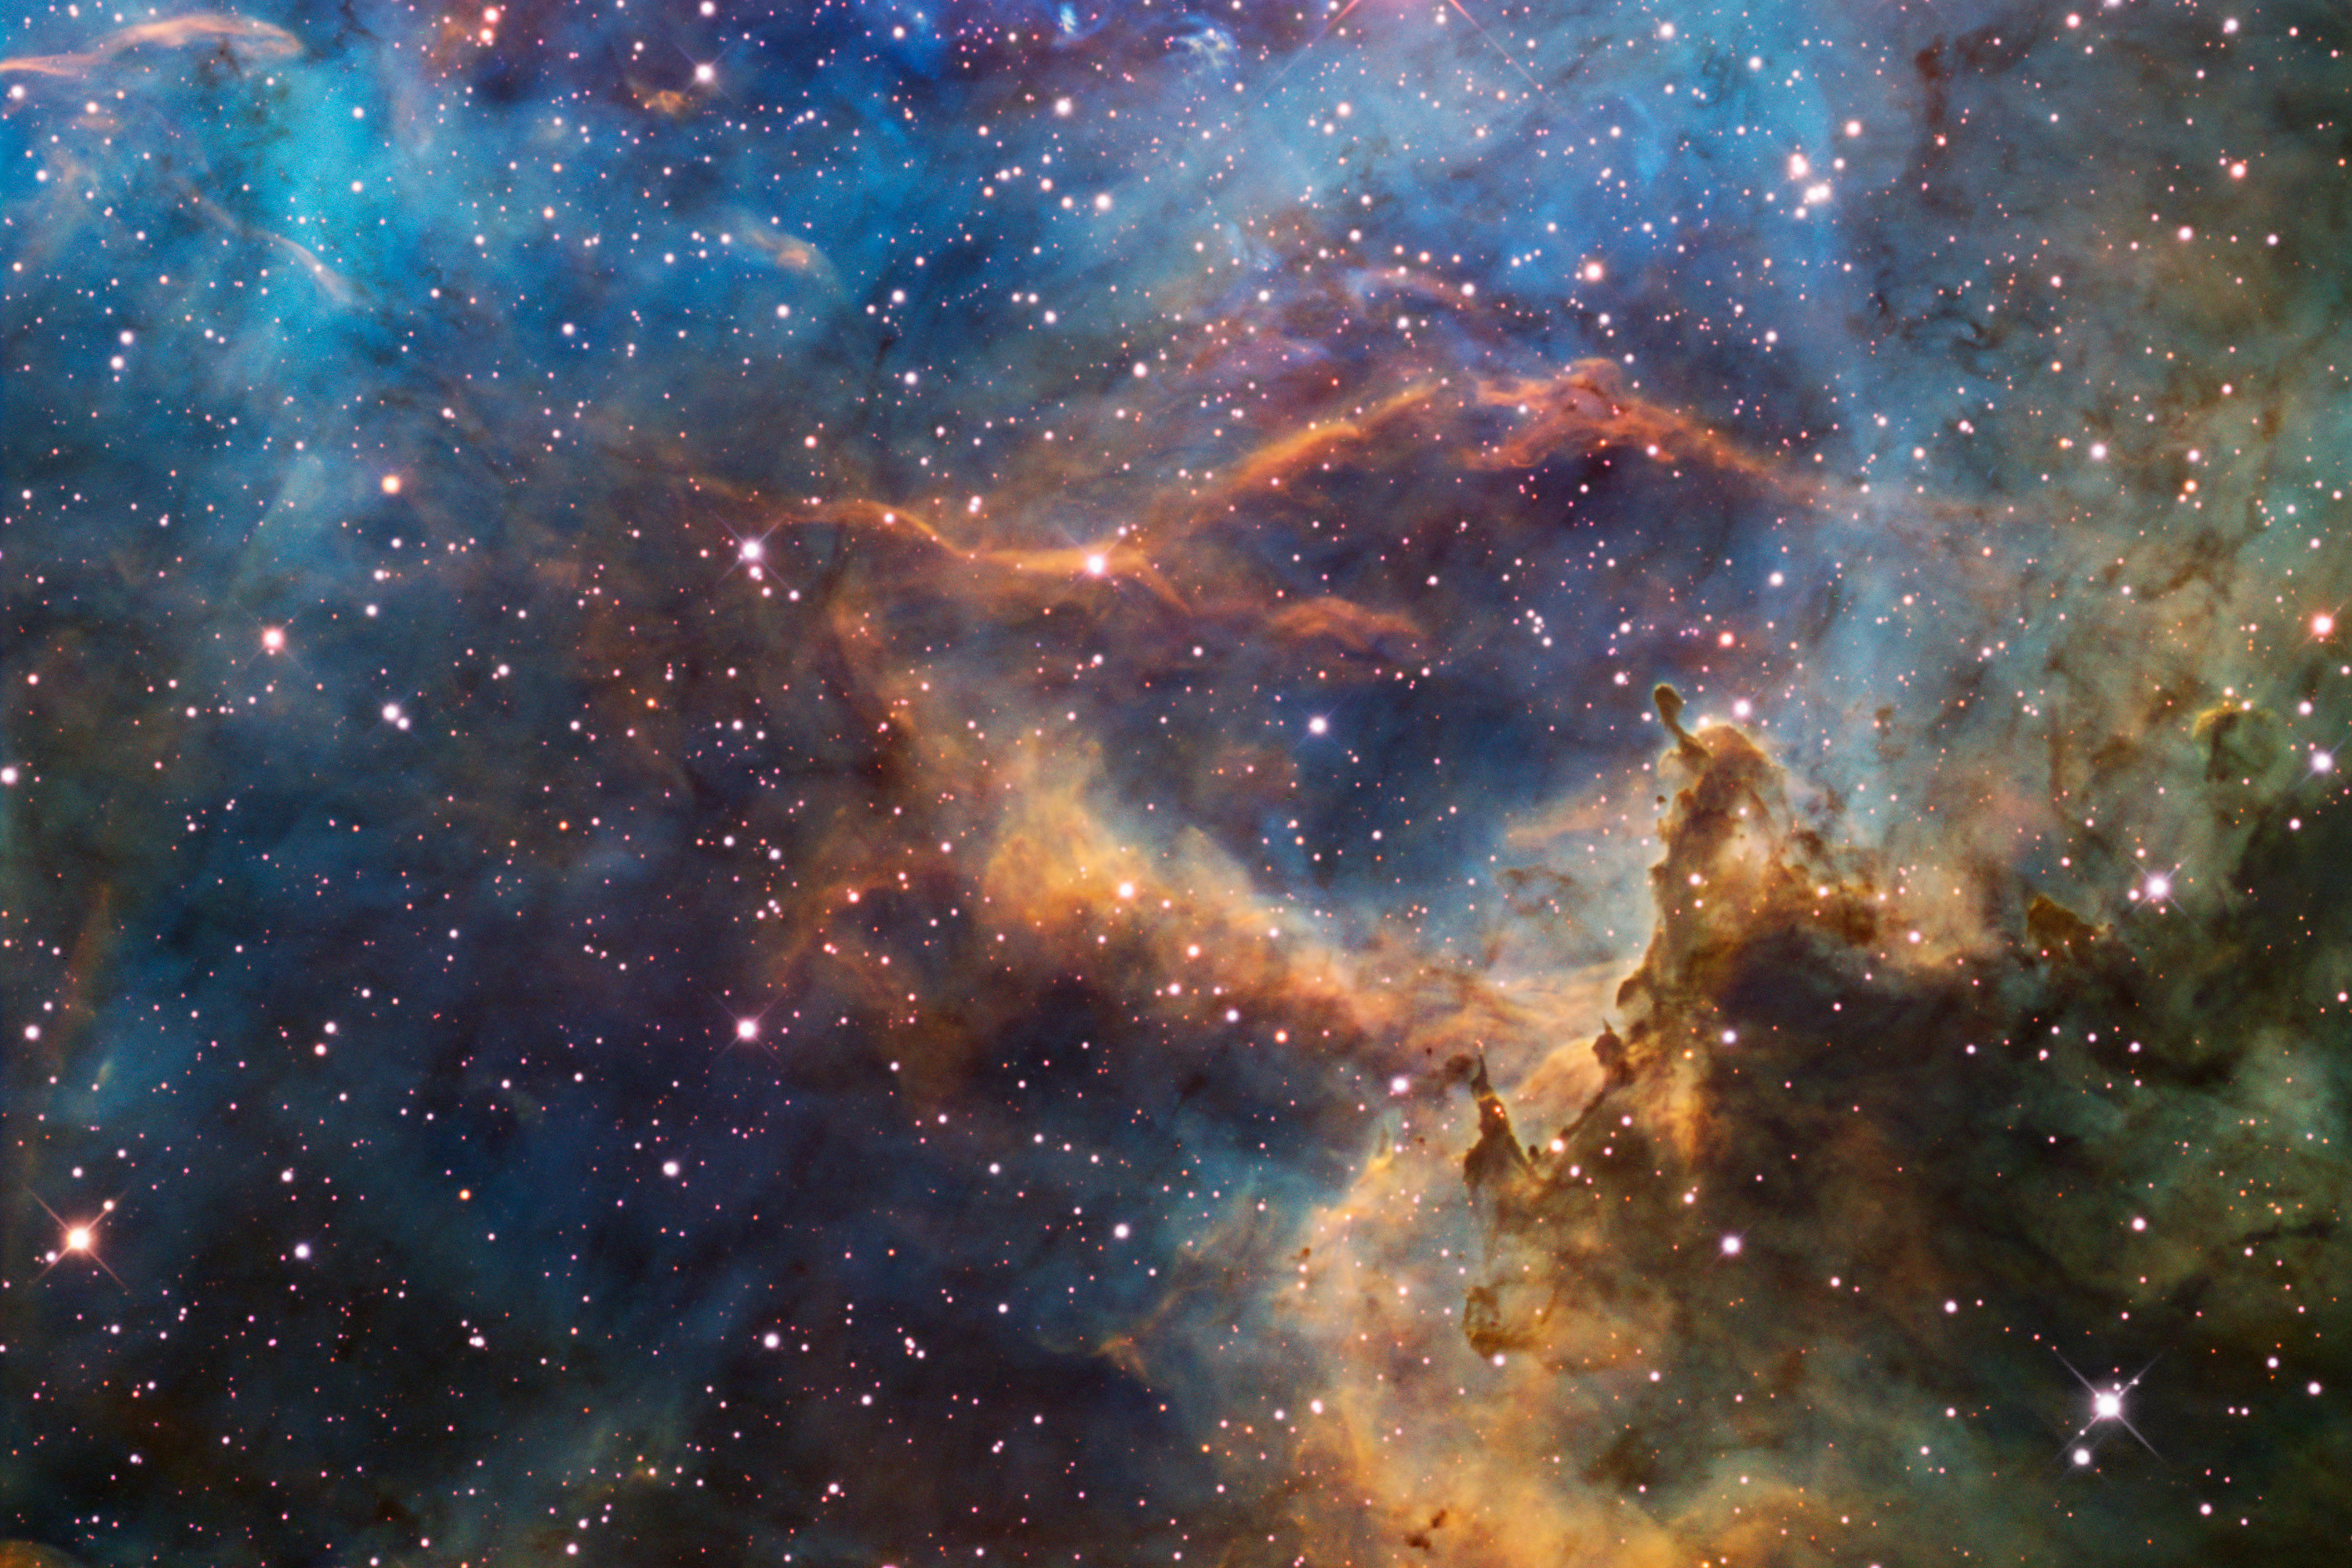 3000x2000 18 hours of data of the Rosette Nebula. Hubble Photography